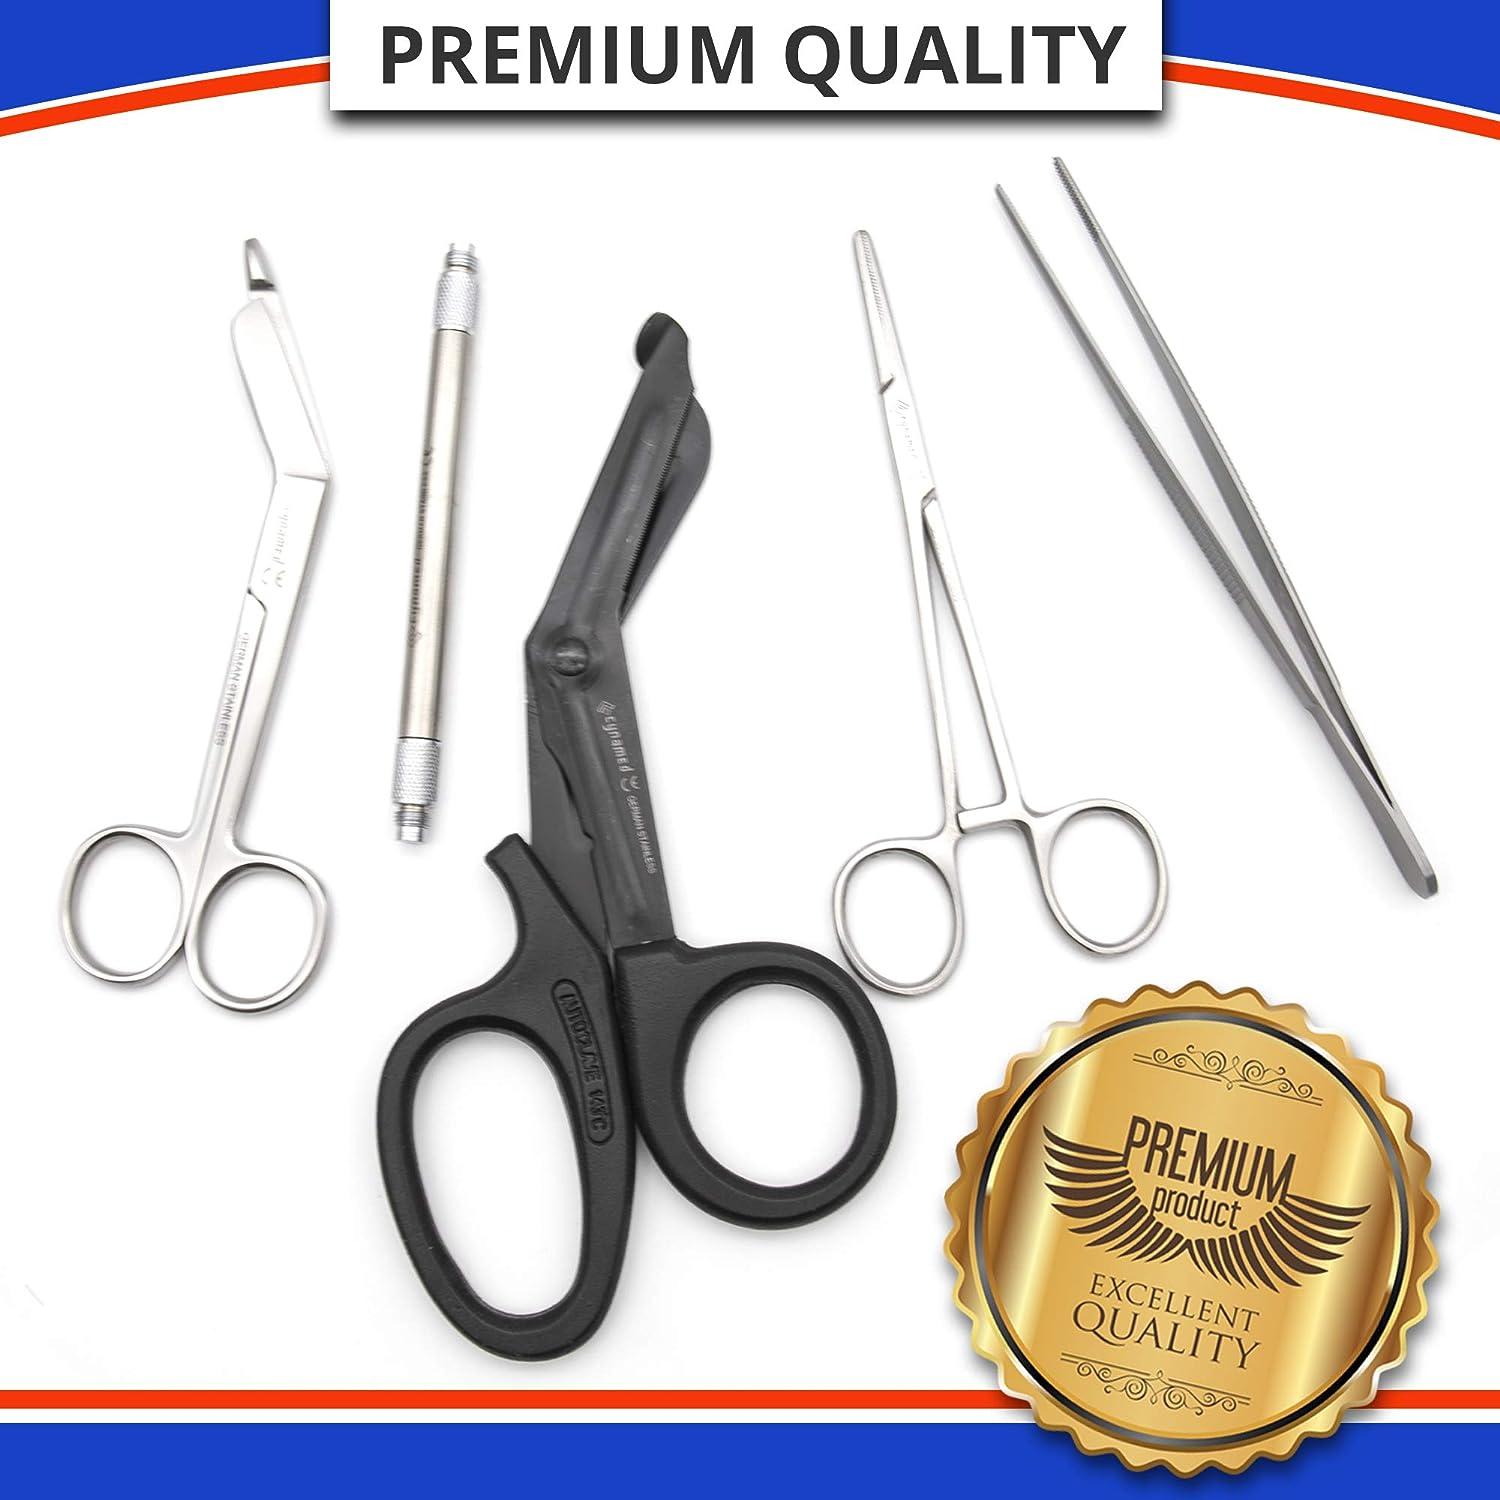 Medical Bandage Scissors - Trauma Scissors and EMT First Responder Shears -  Made with Premium Quality Stainless Steel for Nurse, Doctors, First Aid